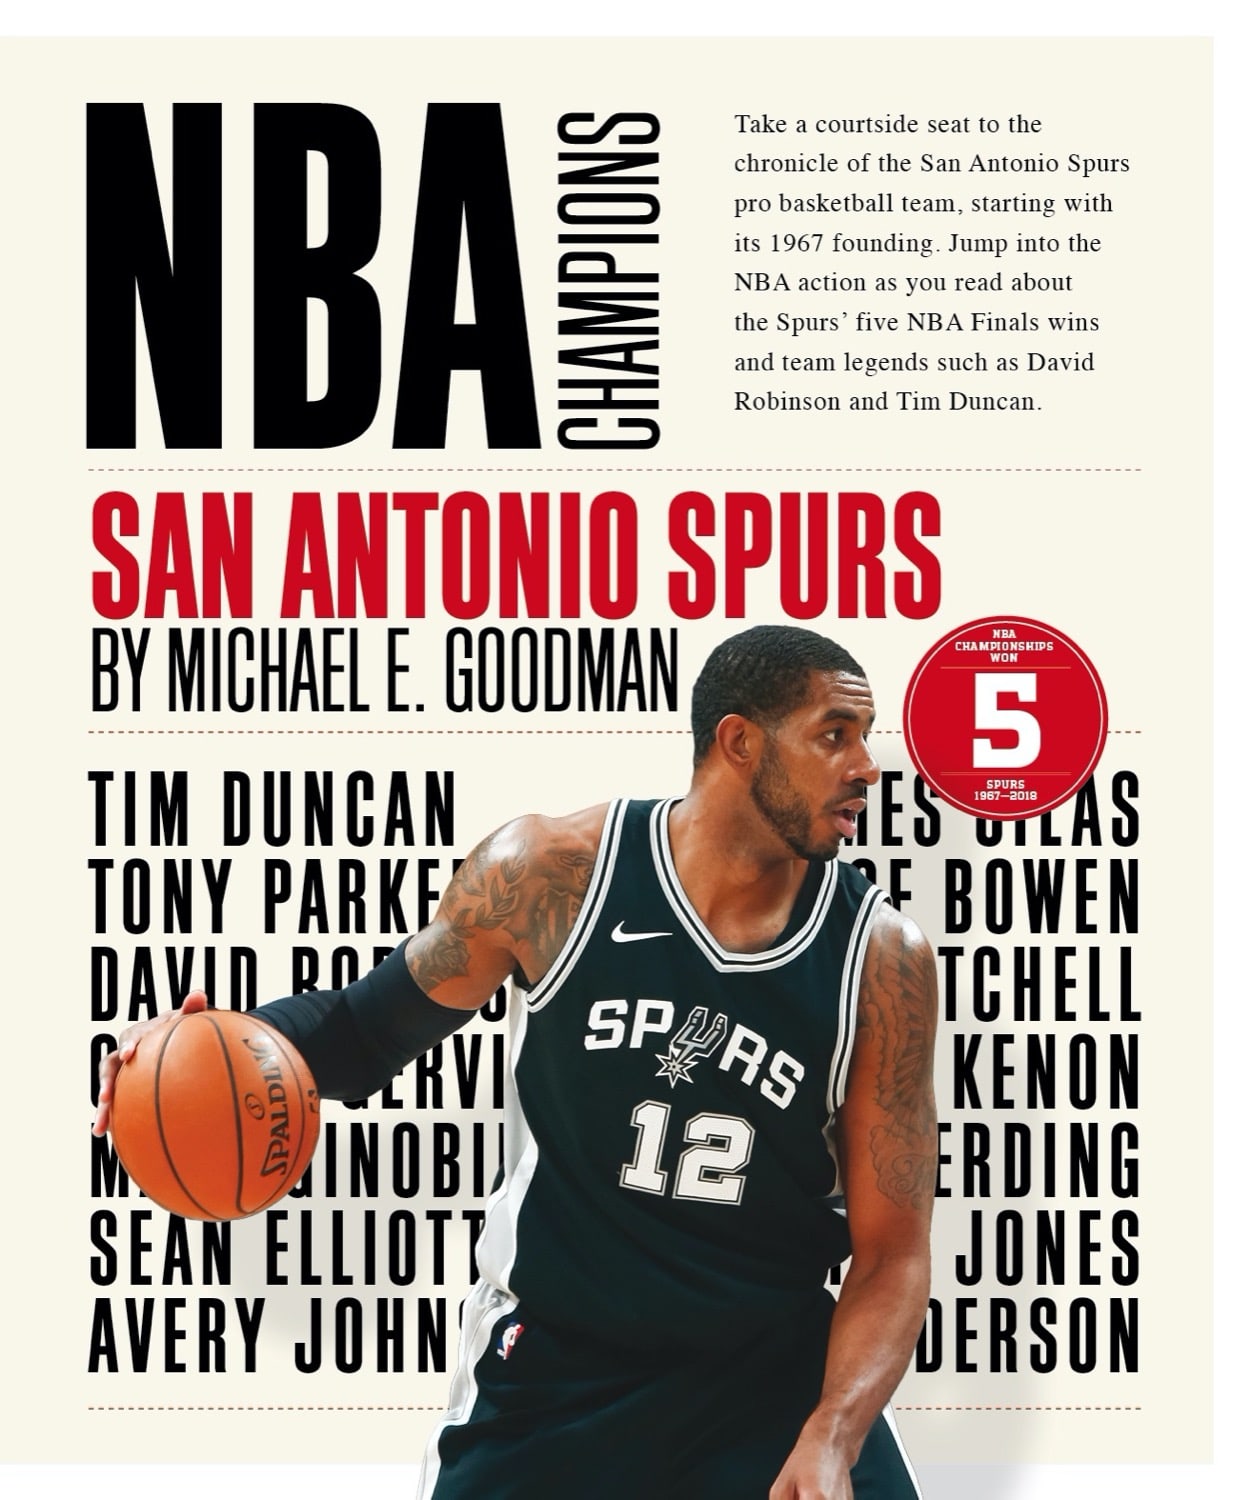 How many NBA championships have the San Antonio Spurs won?